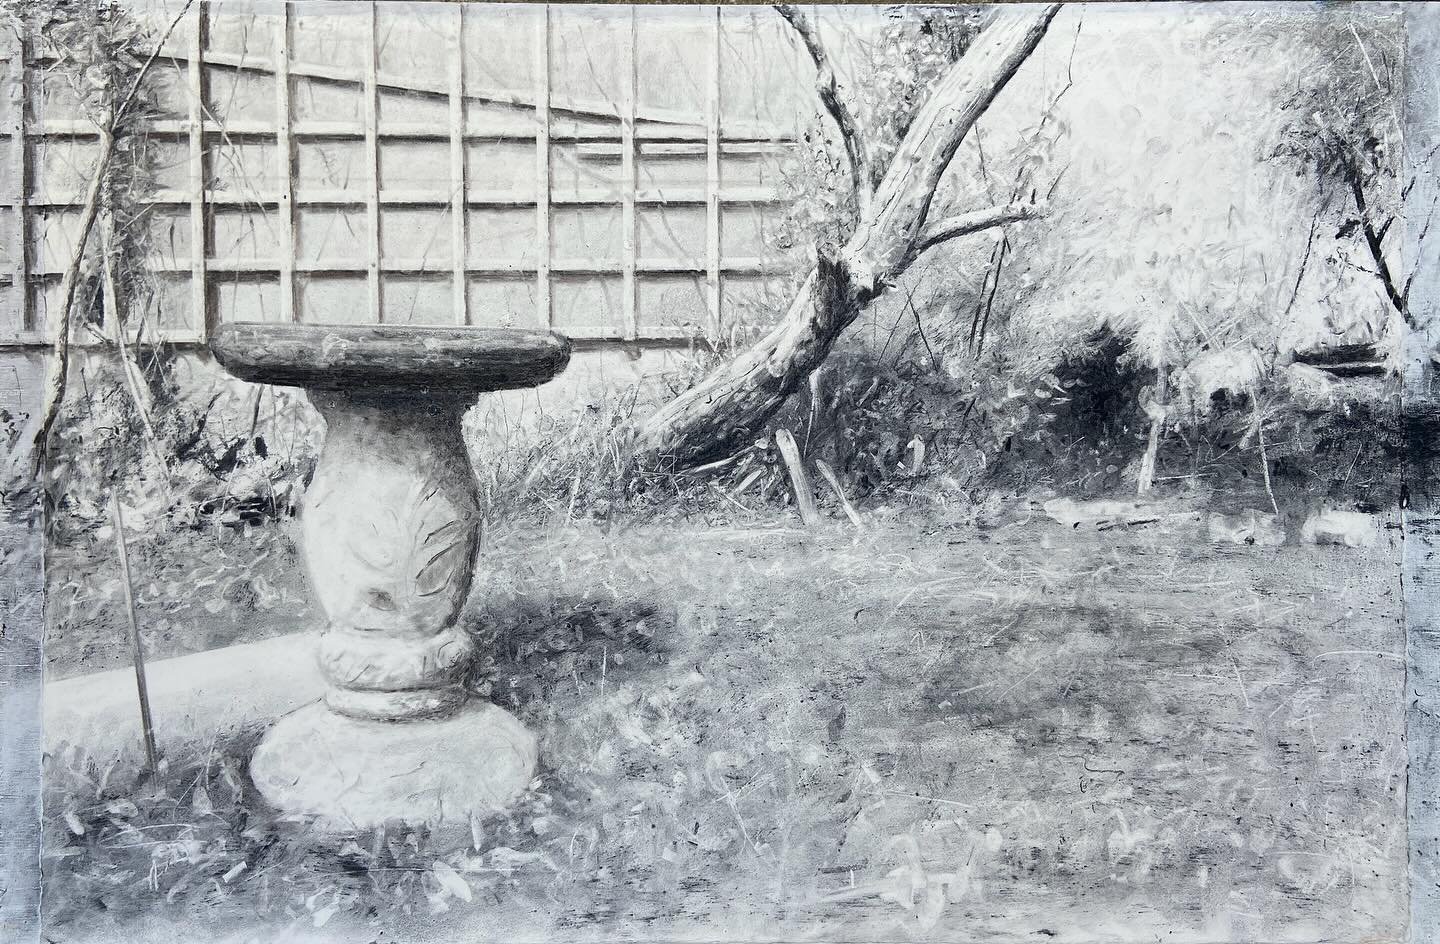 &lsquo;Bird bath &amp; apple tree&rsquo; - Charcoal 60cm x 40cm
.
A willow charcoal drawing that I will be entering into the @rbsagallery Summer Show. Deadline for entries is this Monday 22 April if you&rsquo;re thinking of entering. It&rsquo;s alway